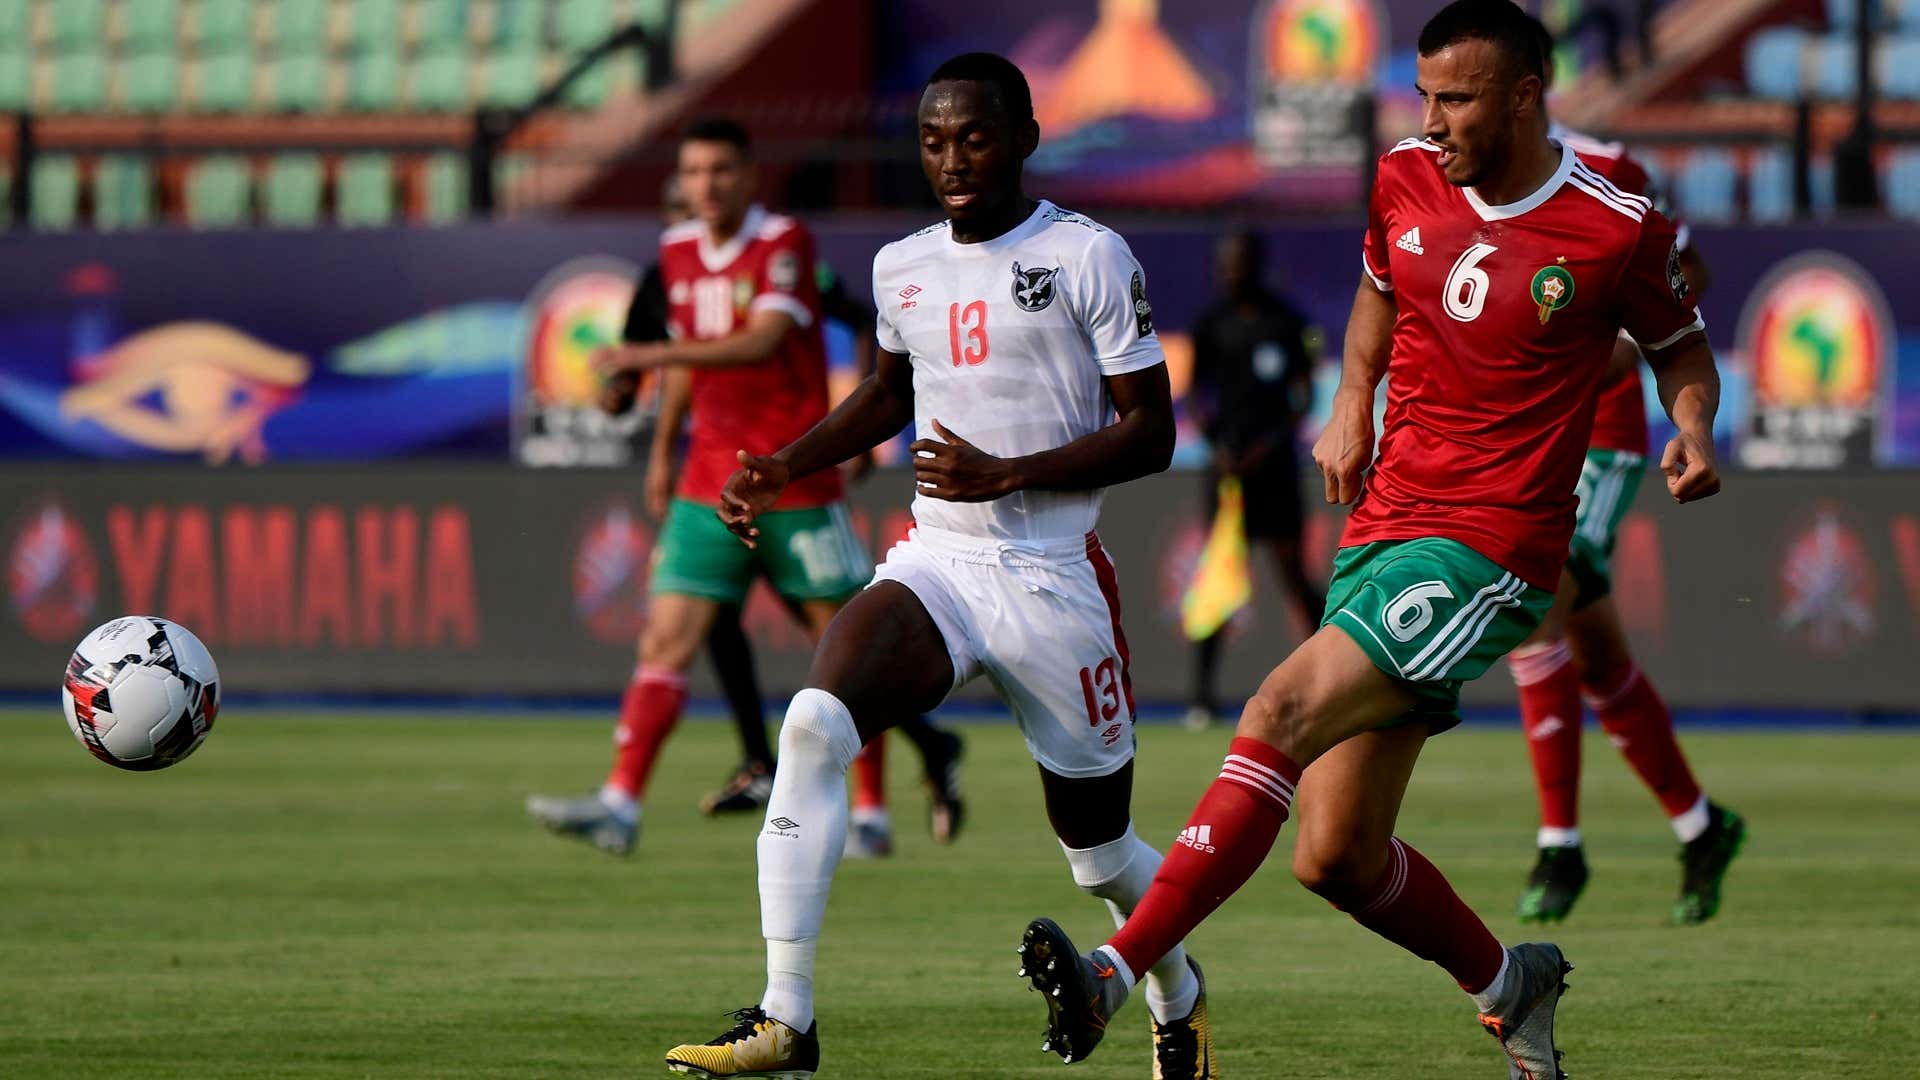 Morocco's defender Romain Saiss (R) passes the ball as he is marked by Namibia's forward Peter Shalulile during the 2019 Africa Cup of Nations